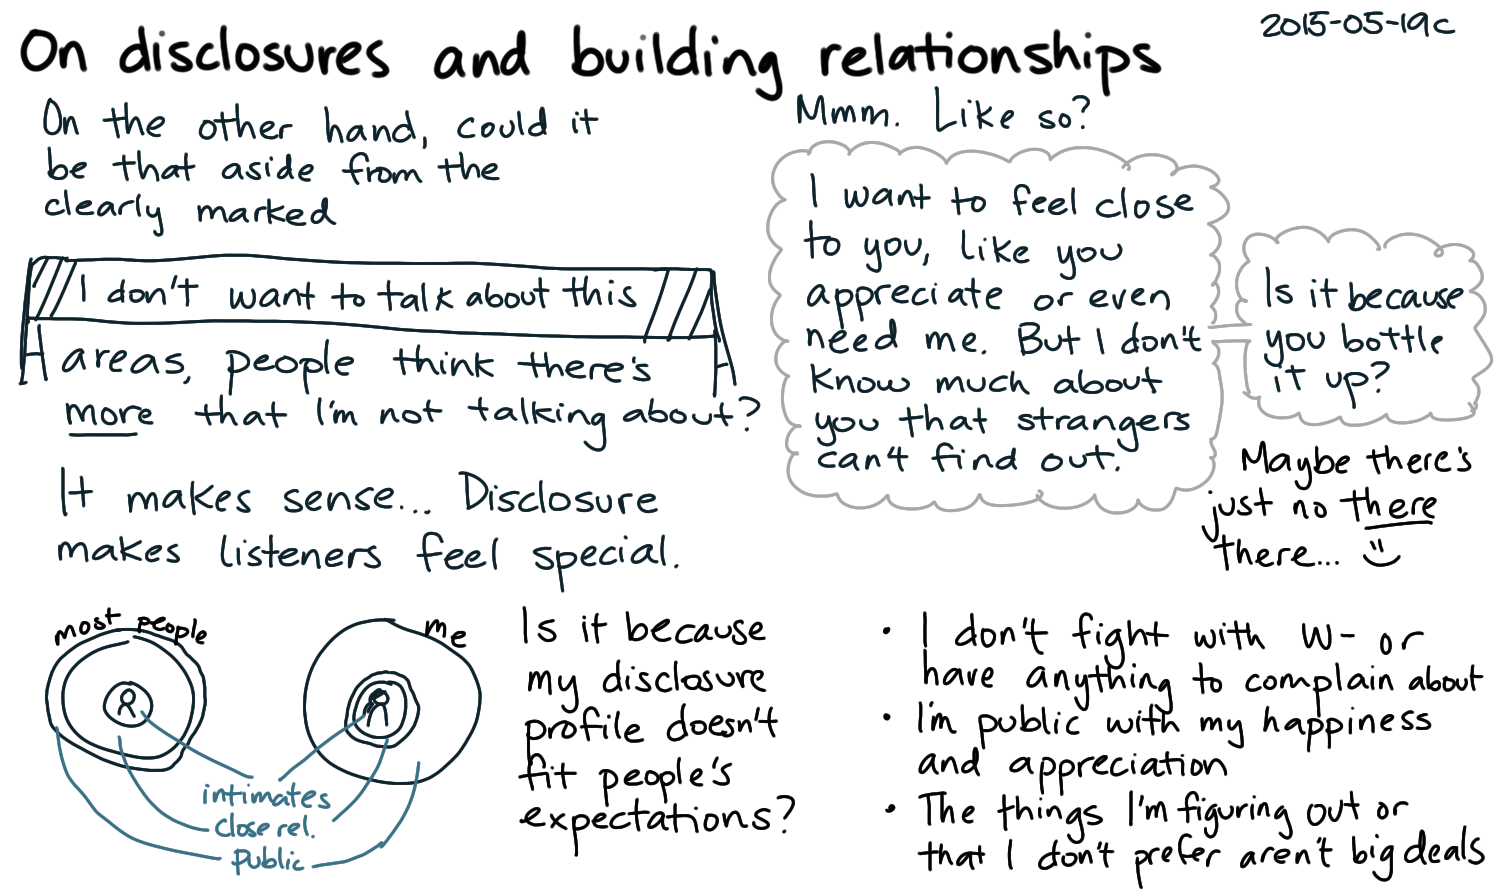 2015-05-19c On disclosures and building relationships -- index card #sharing #reservation.png